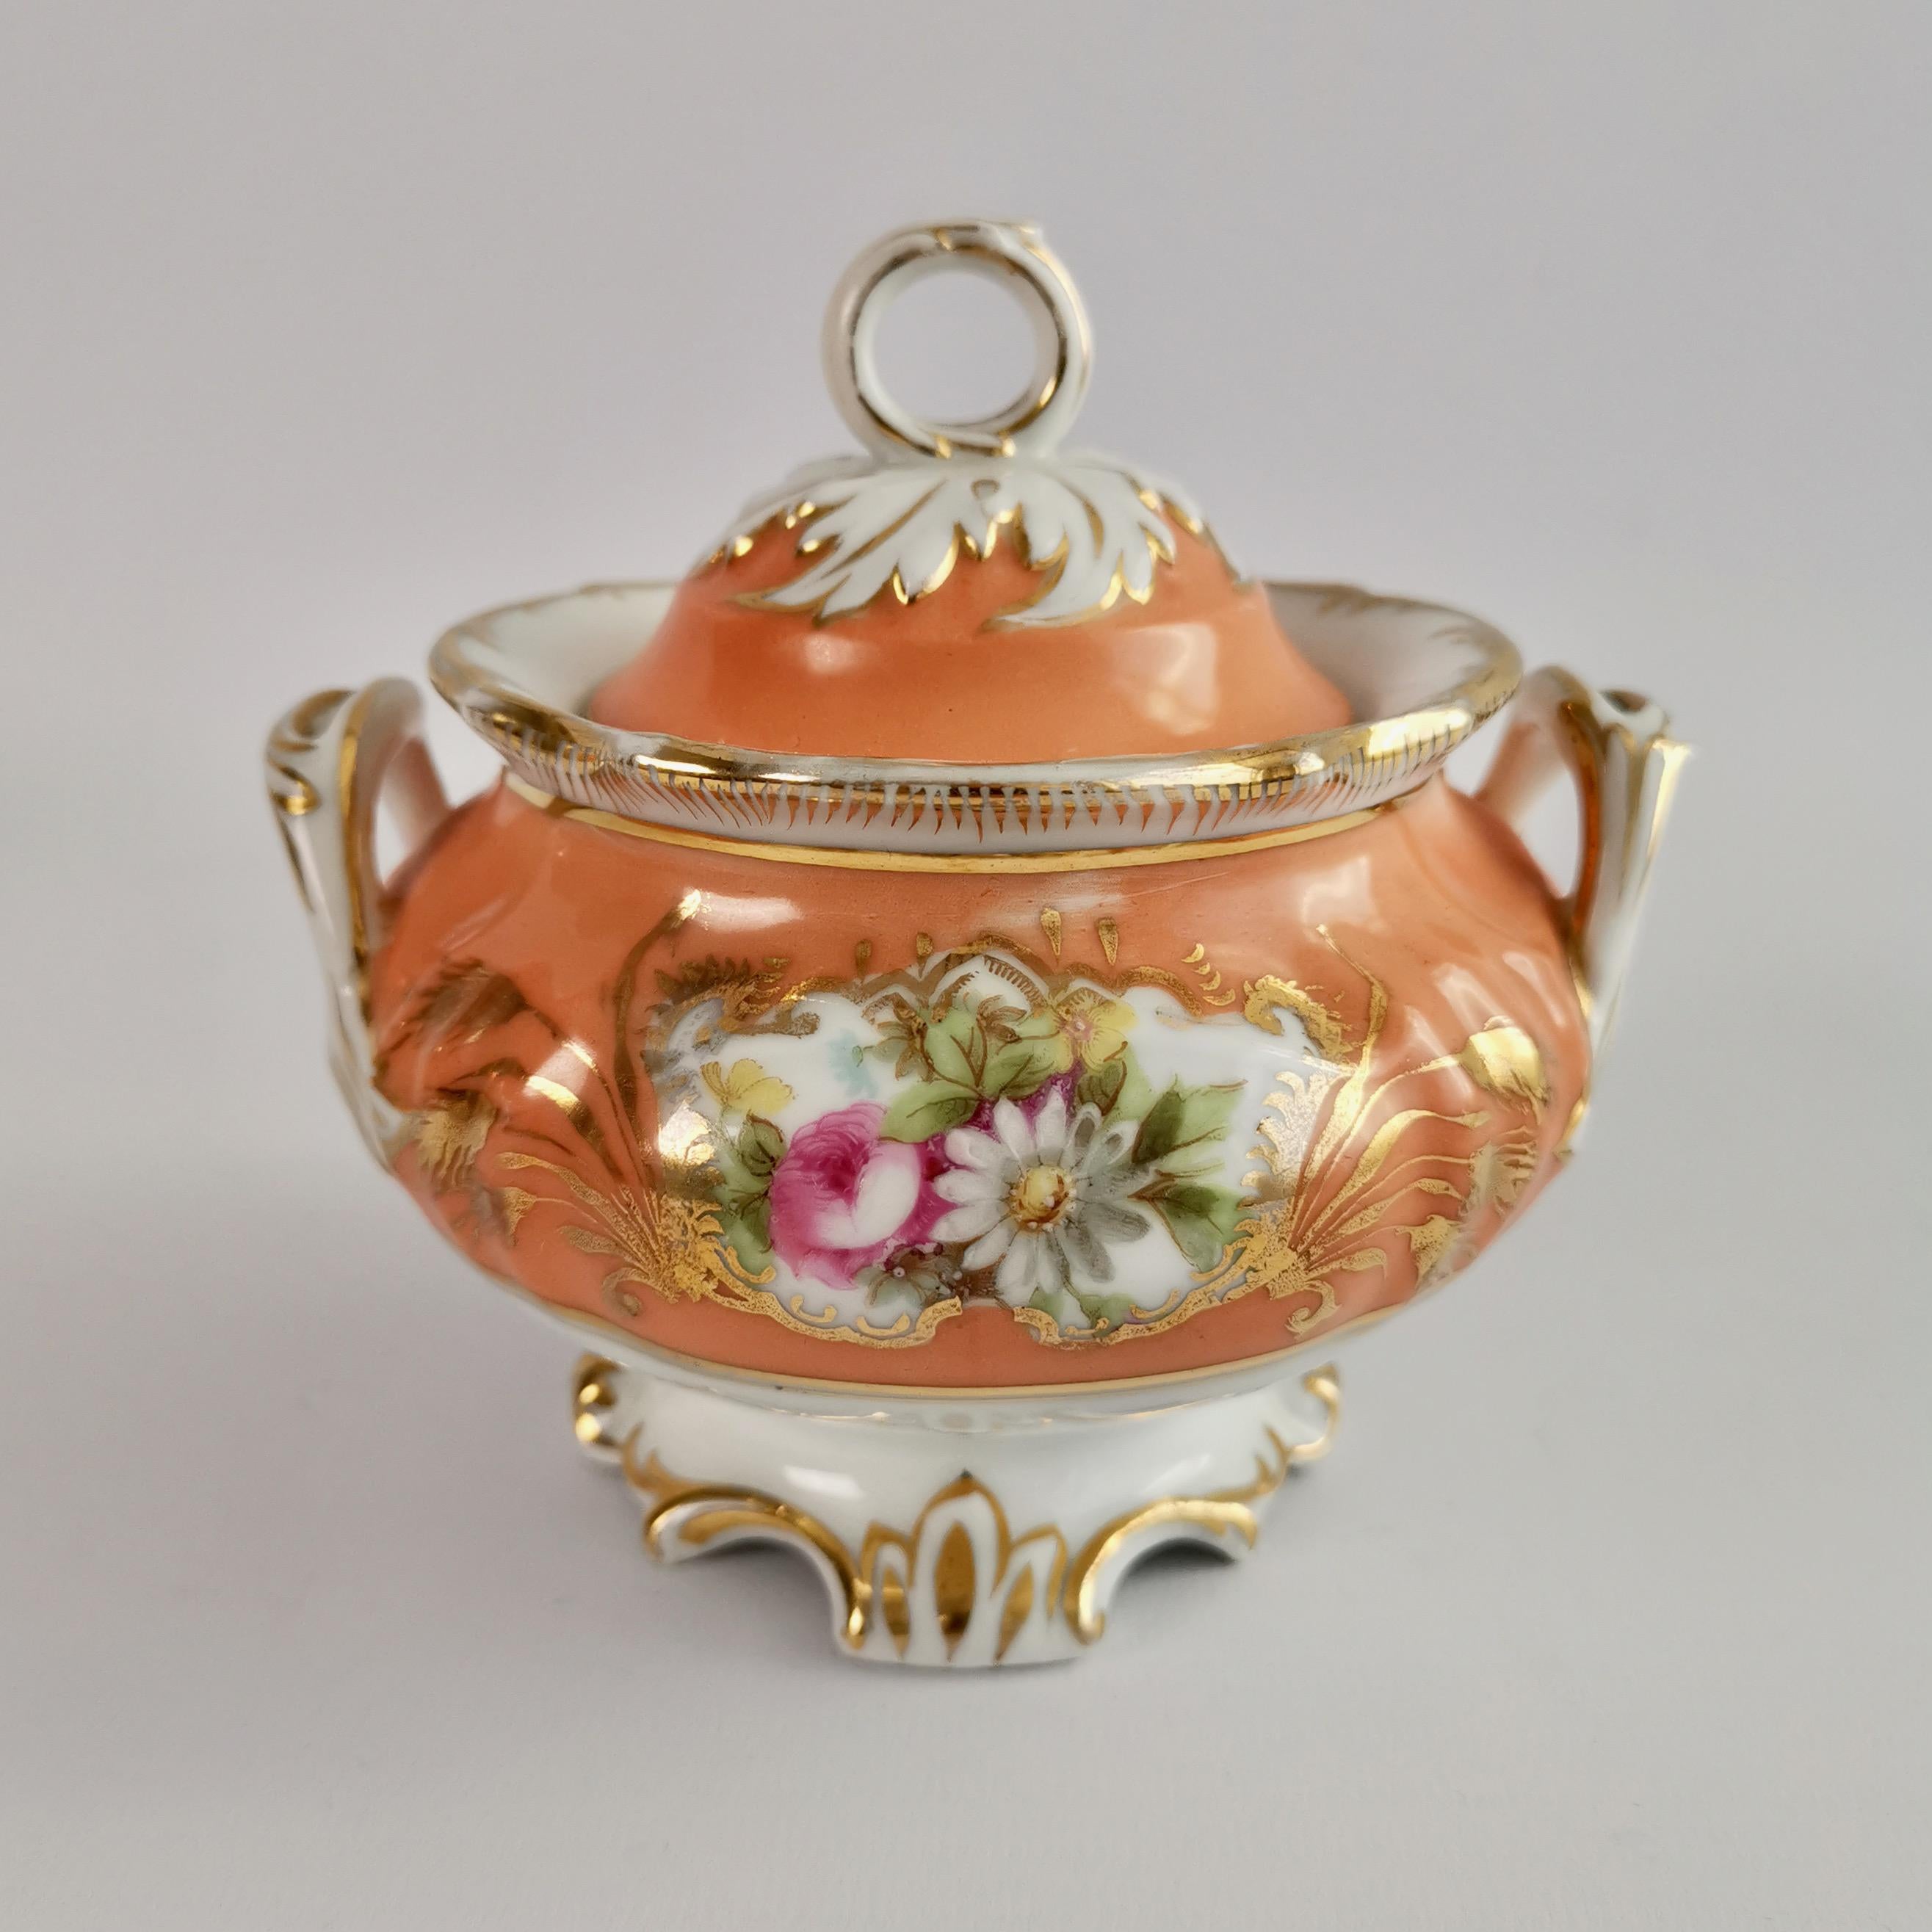 Hand-Painted German Porcelain Sucrier Set, Orange with Flowers, Rococo Revival, ca 1860